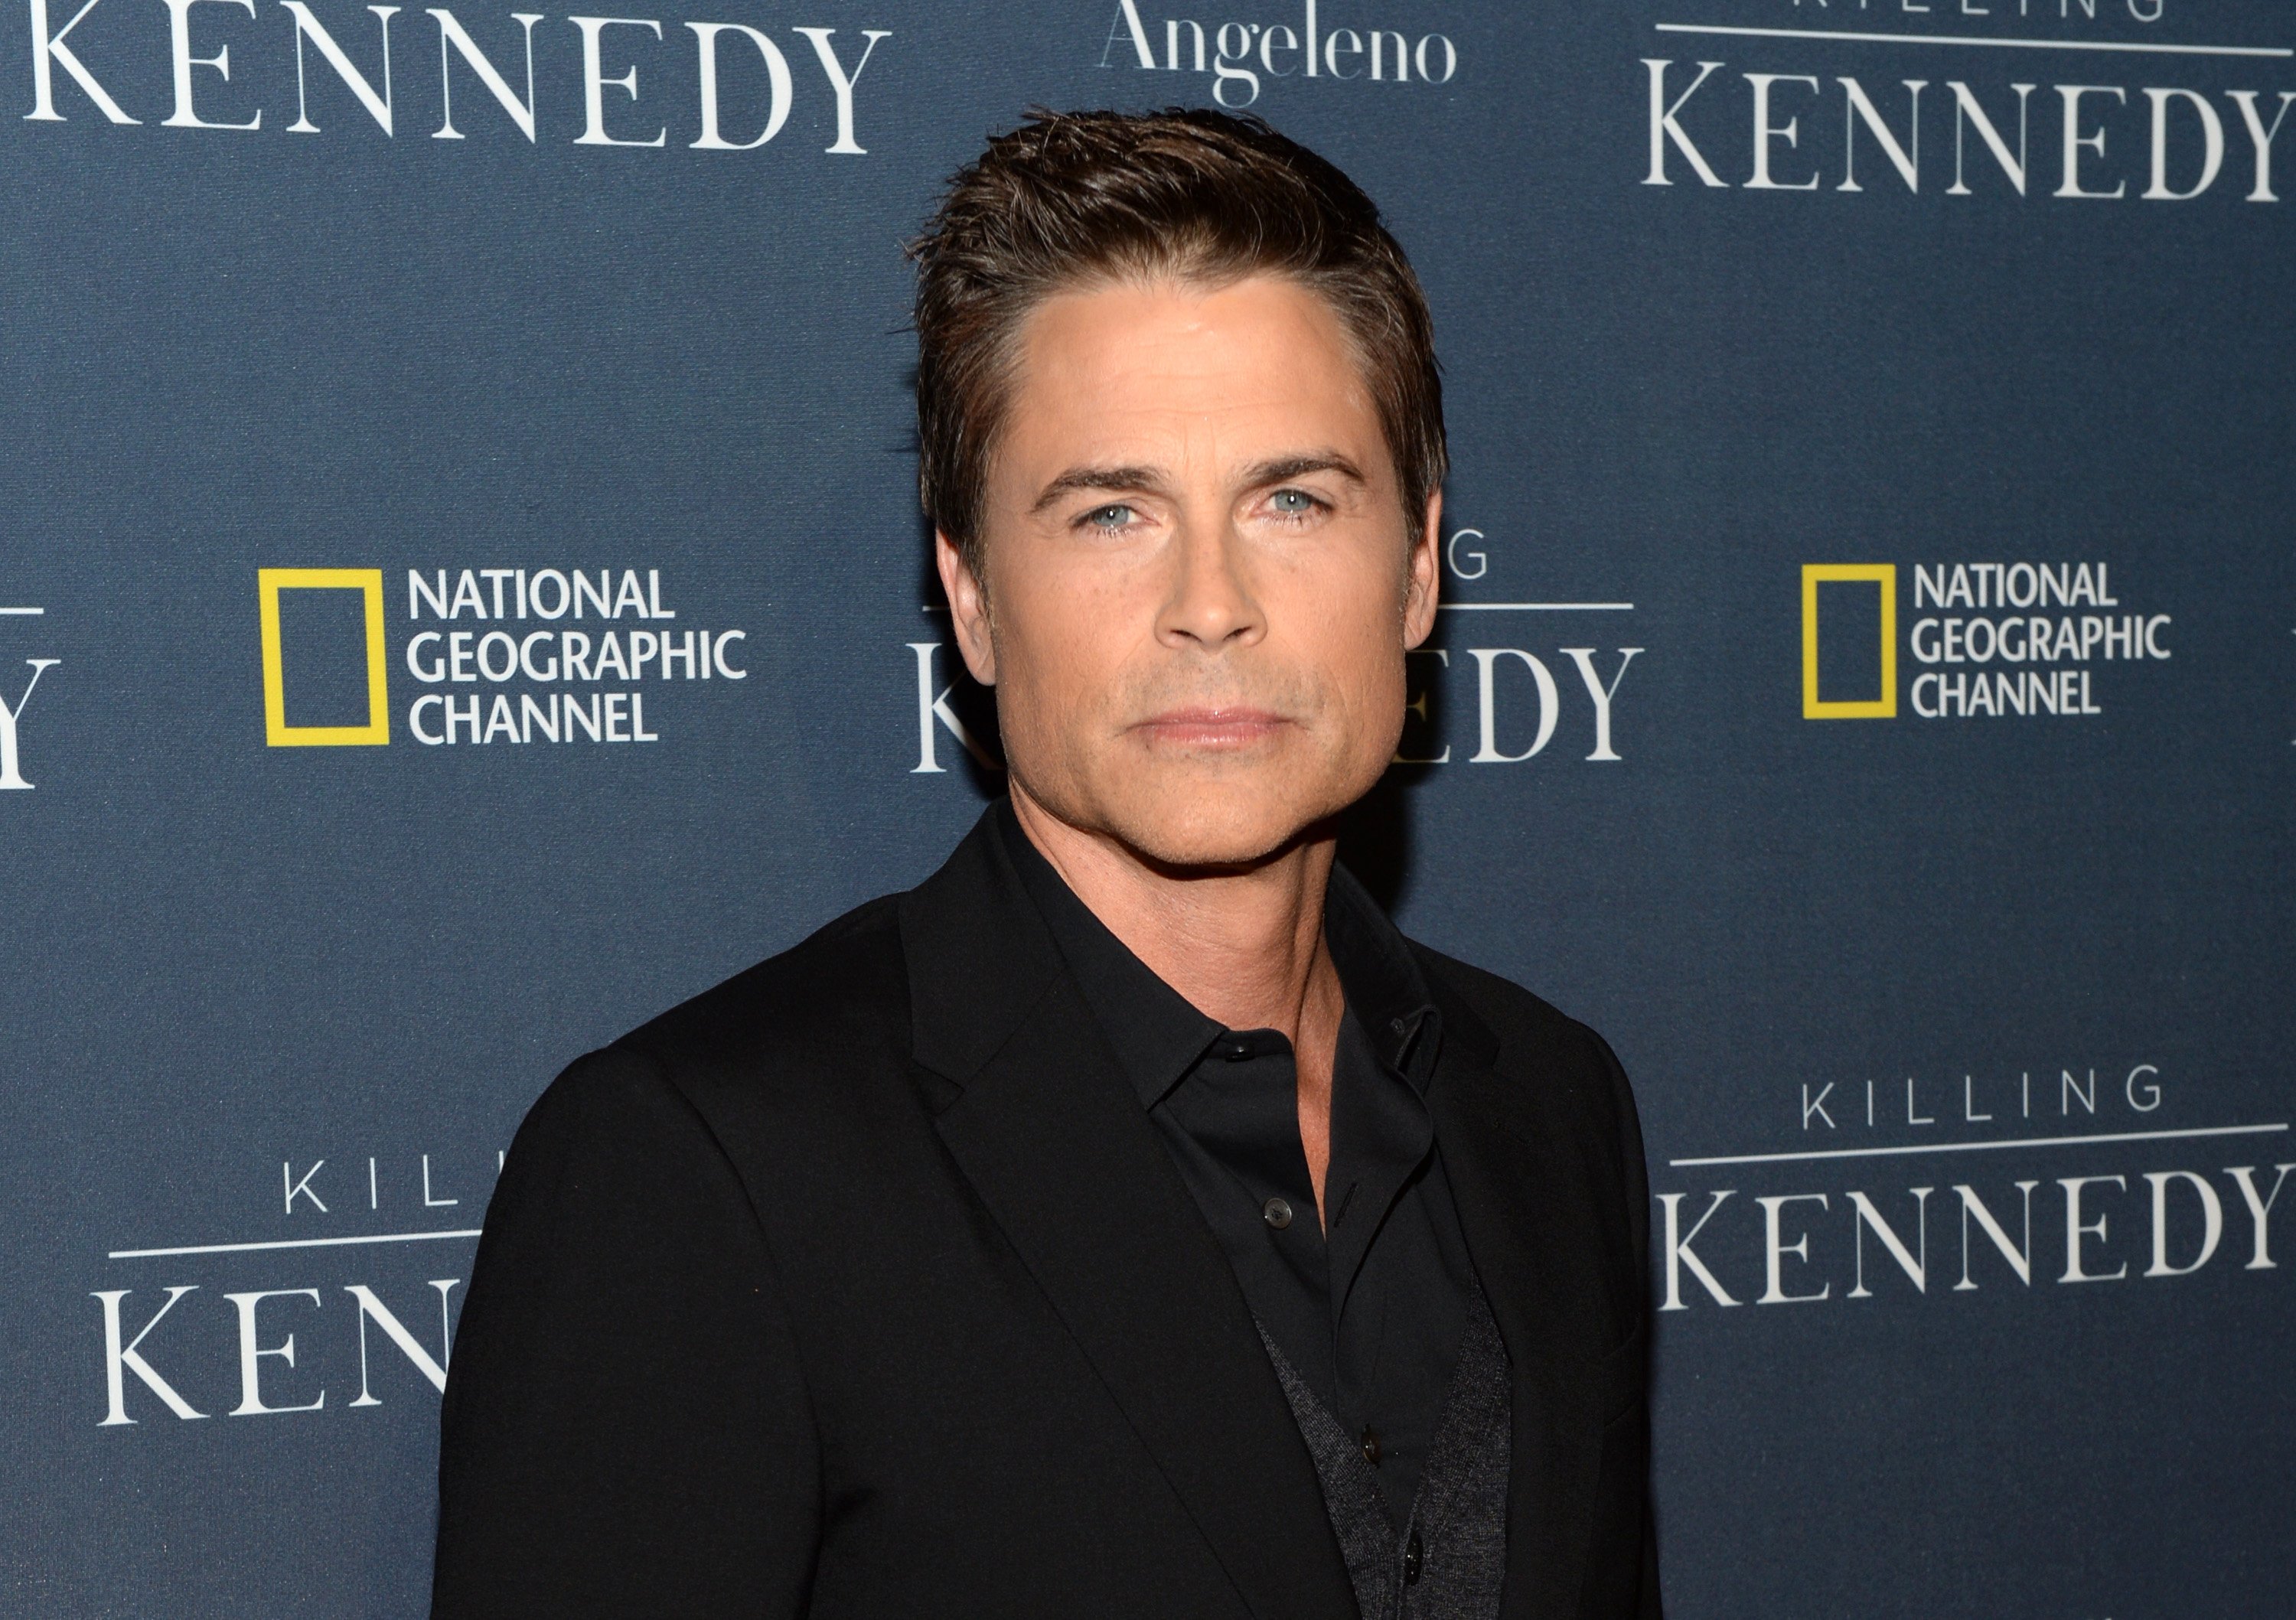 Actor Rob Lowe attends the "Killing Kennedy" Los Angeles premiere at the Saban Theatre on November 4, 2013 in Beverly Hills, California. | Source: Getty Images